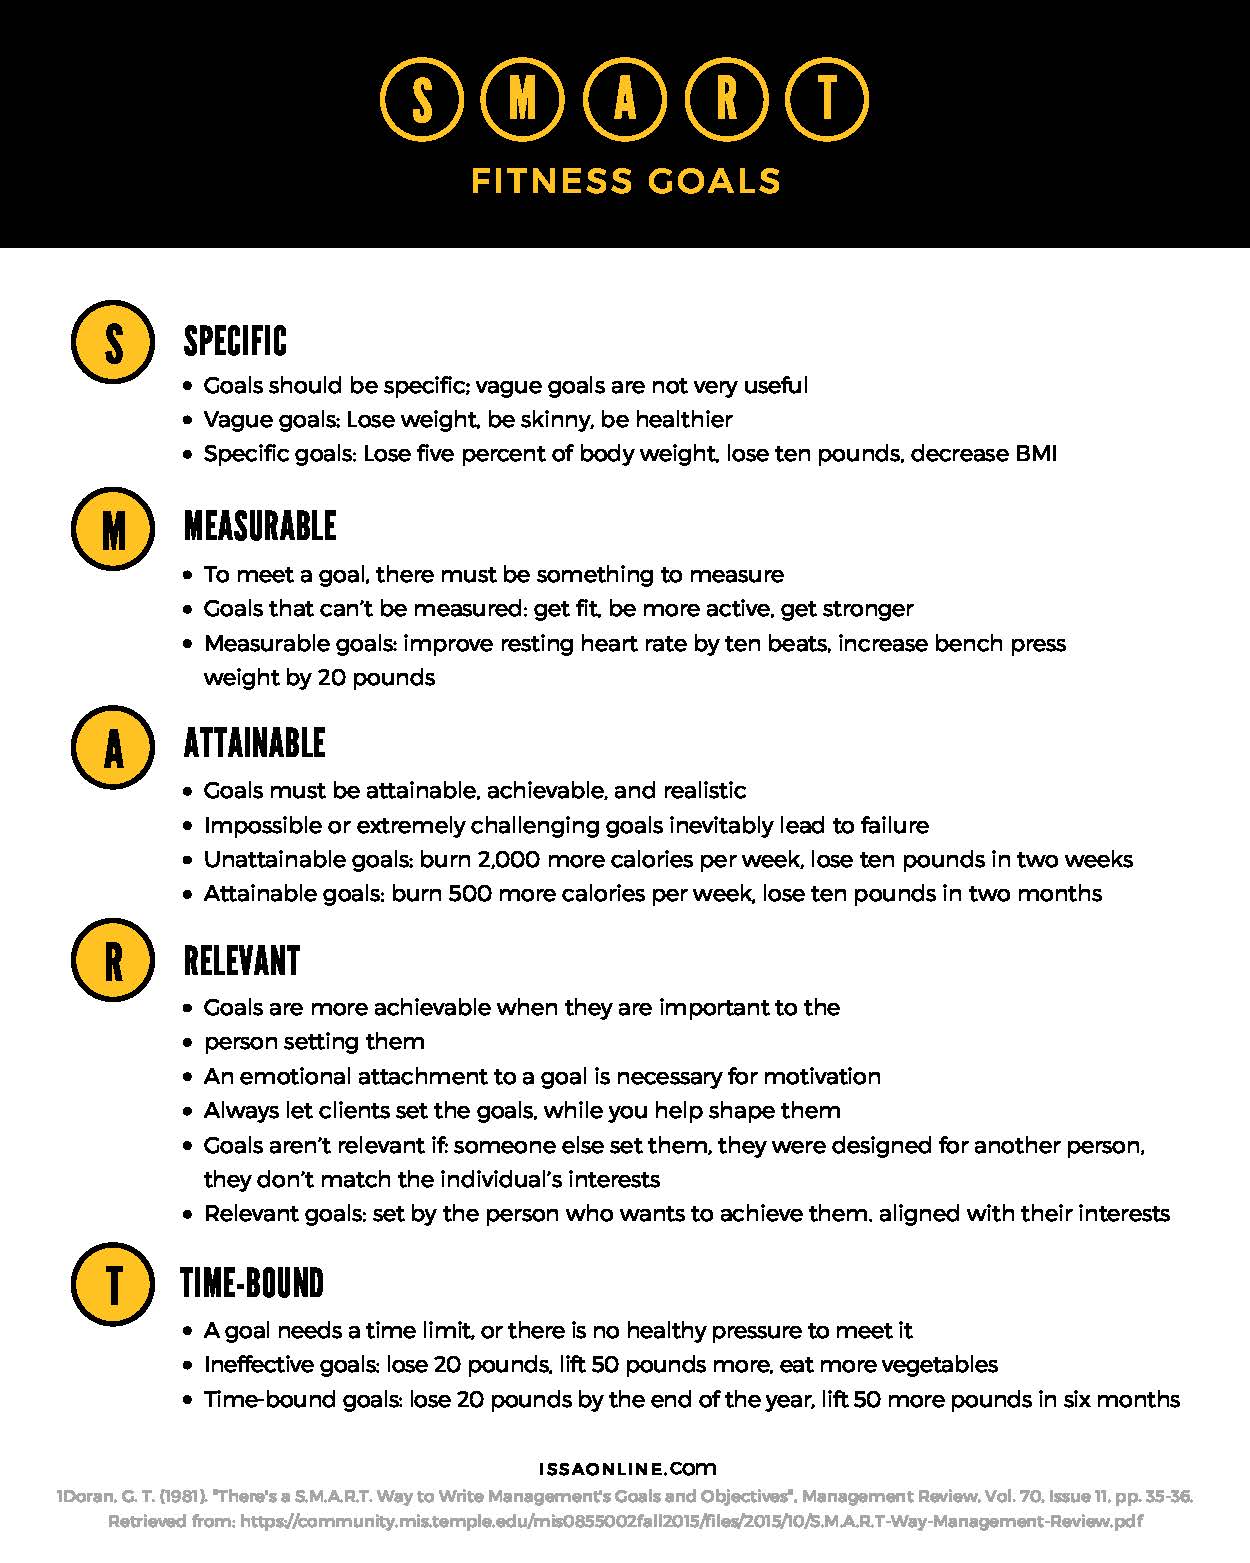 5 Steps to achieve fitness goals - Fitness Enhancement Personal Training